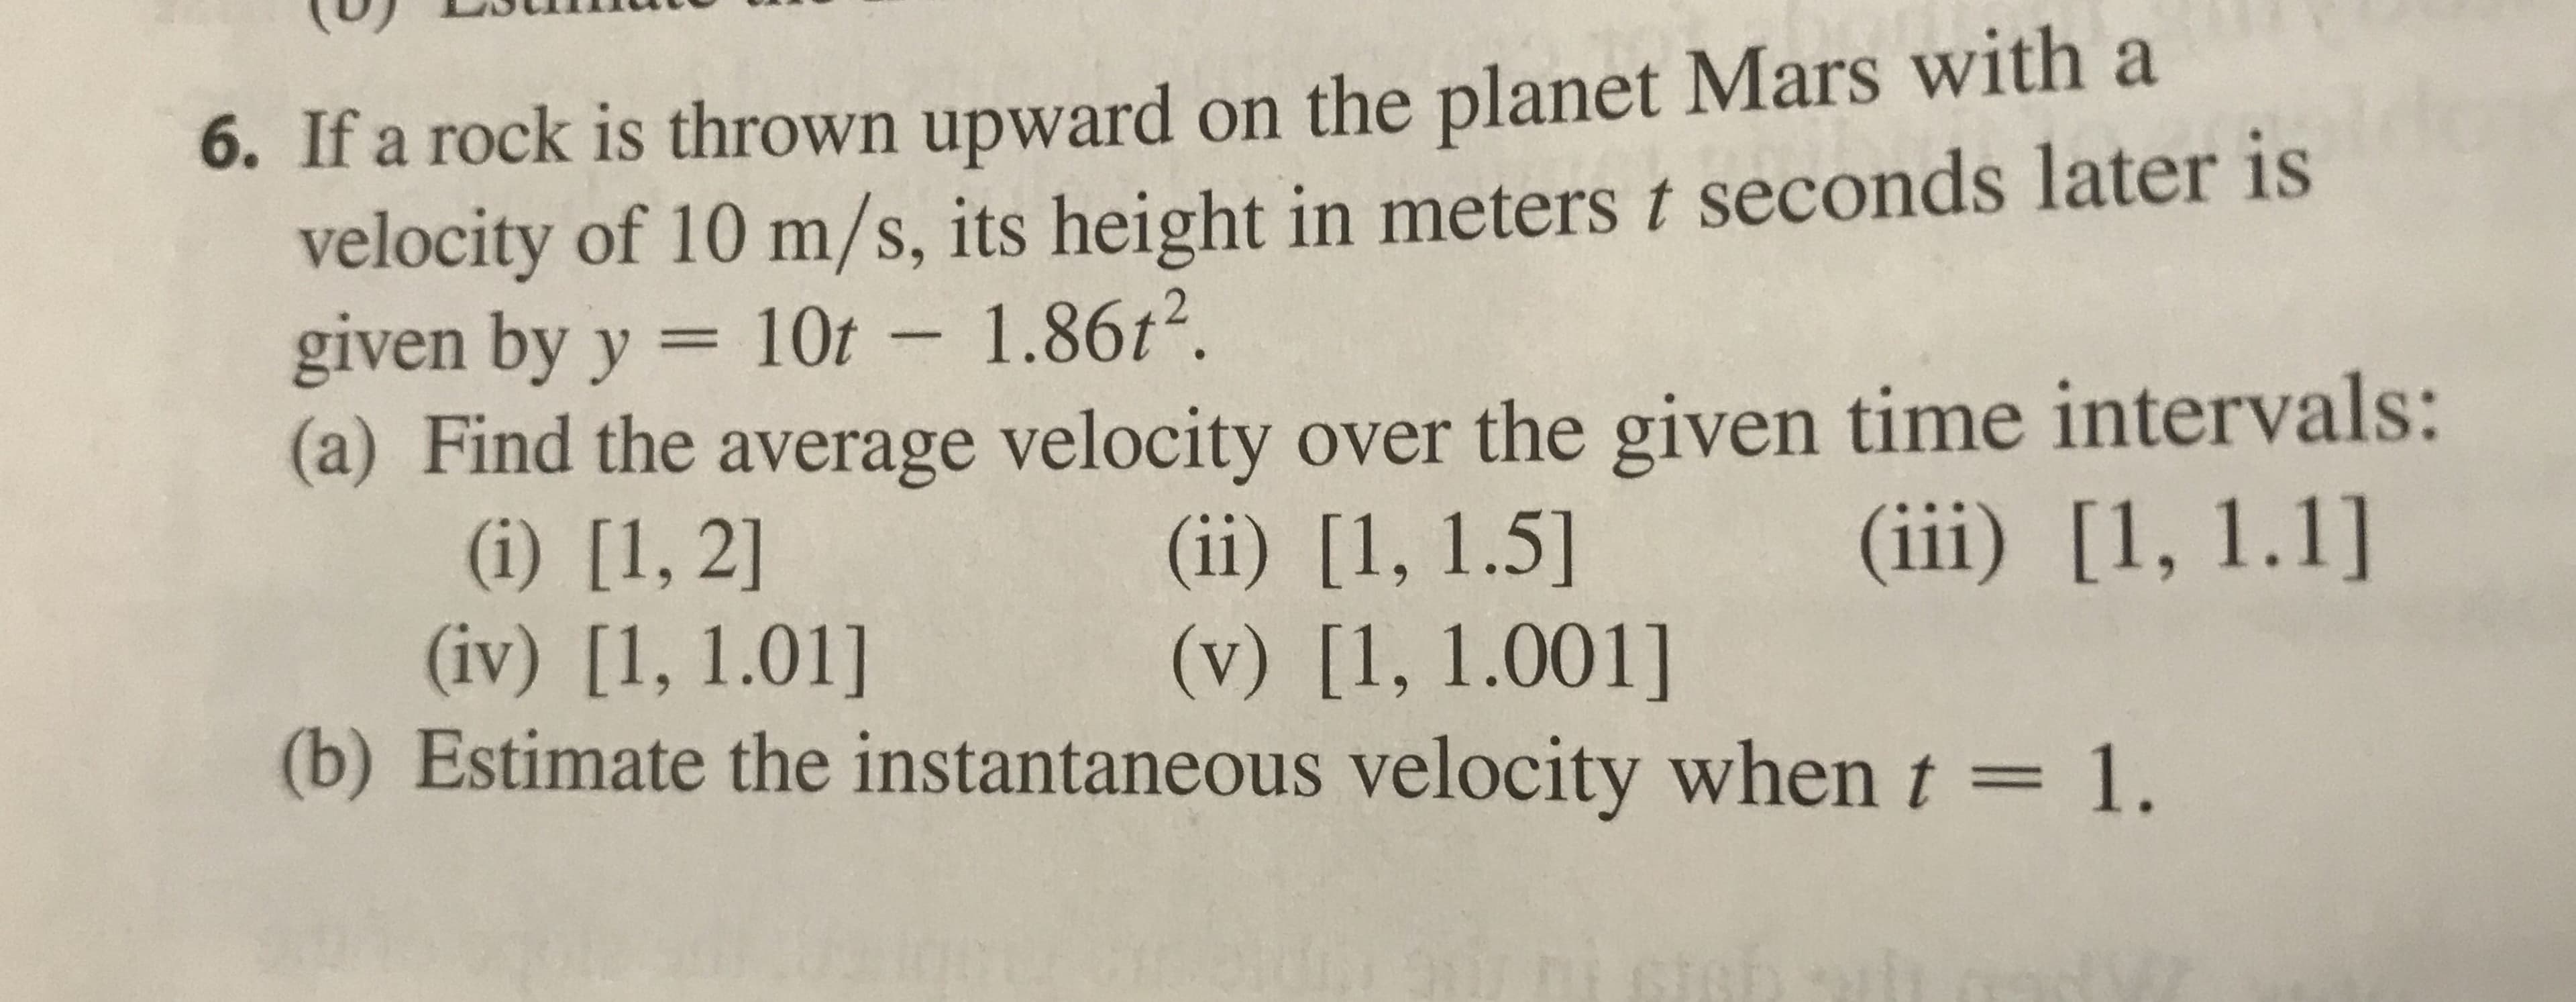 6. If a rock is thrown upward on the planet Mars with a
velocity of 10 m/s, its height in meters t seconds later is
given by y = 10t – 1.86t².
(a) Find the average velocity over the given time intervals:
(i) [1, 2]
(iv) [1, 1.01]
(b) Estimate the instantaneous velocity when t = 1.
||
(iii) [1, 1.1]
(ii) [1, 1.5]
(v) [1, 1.001]
